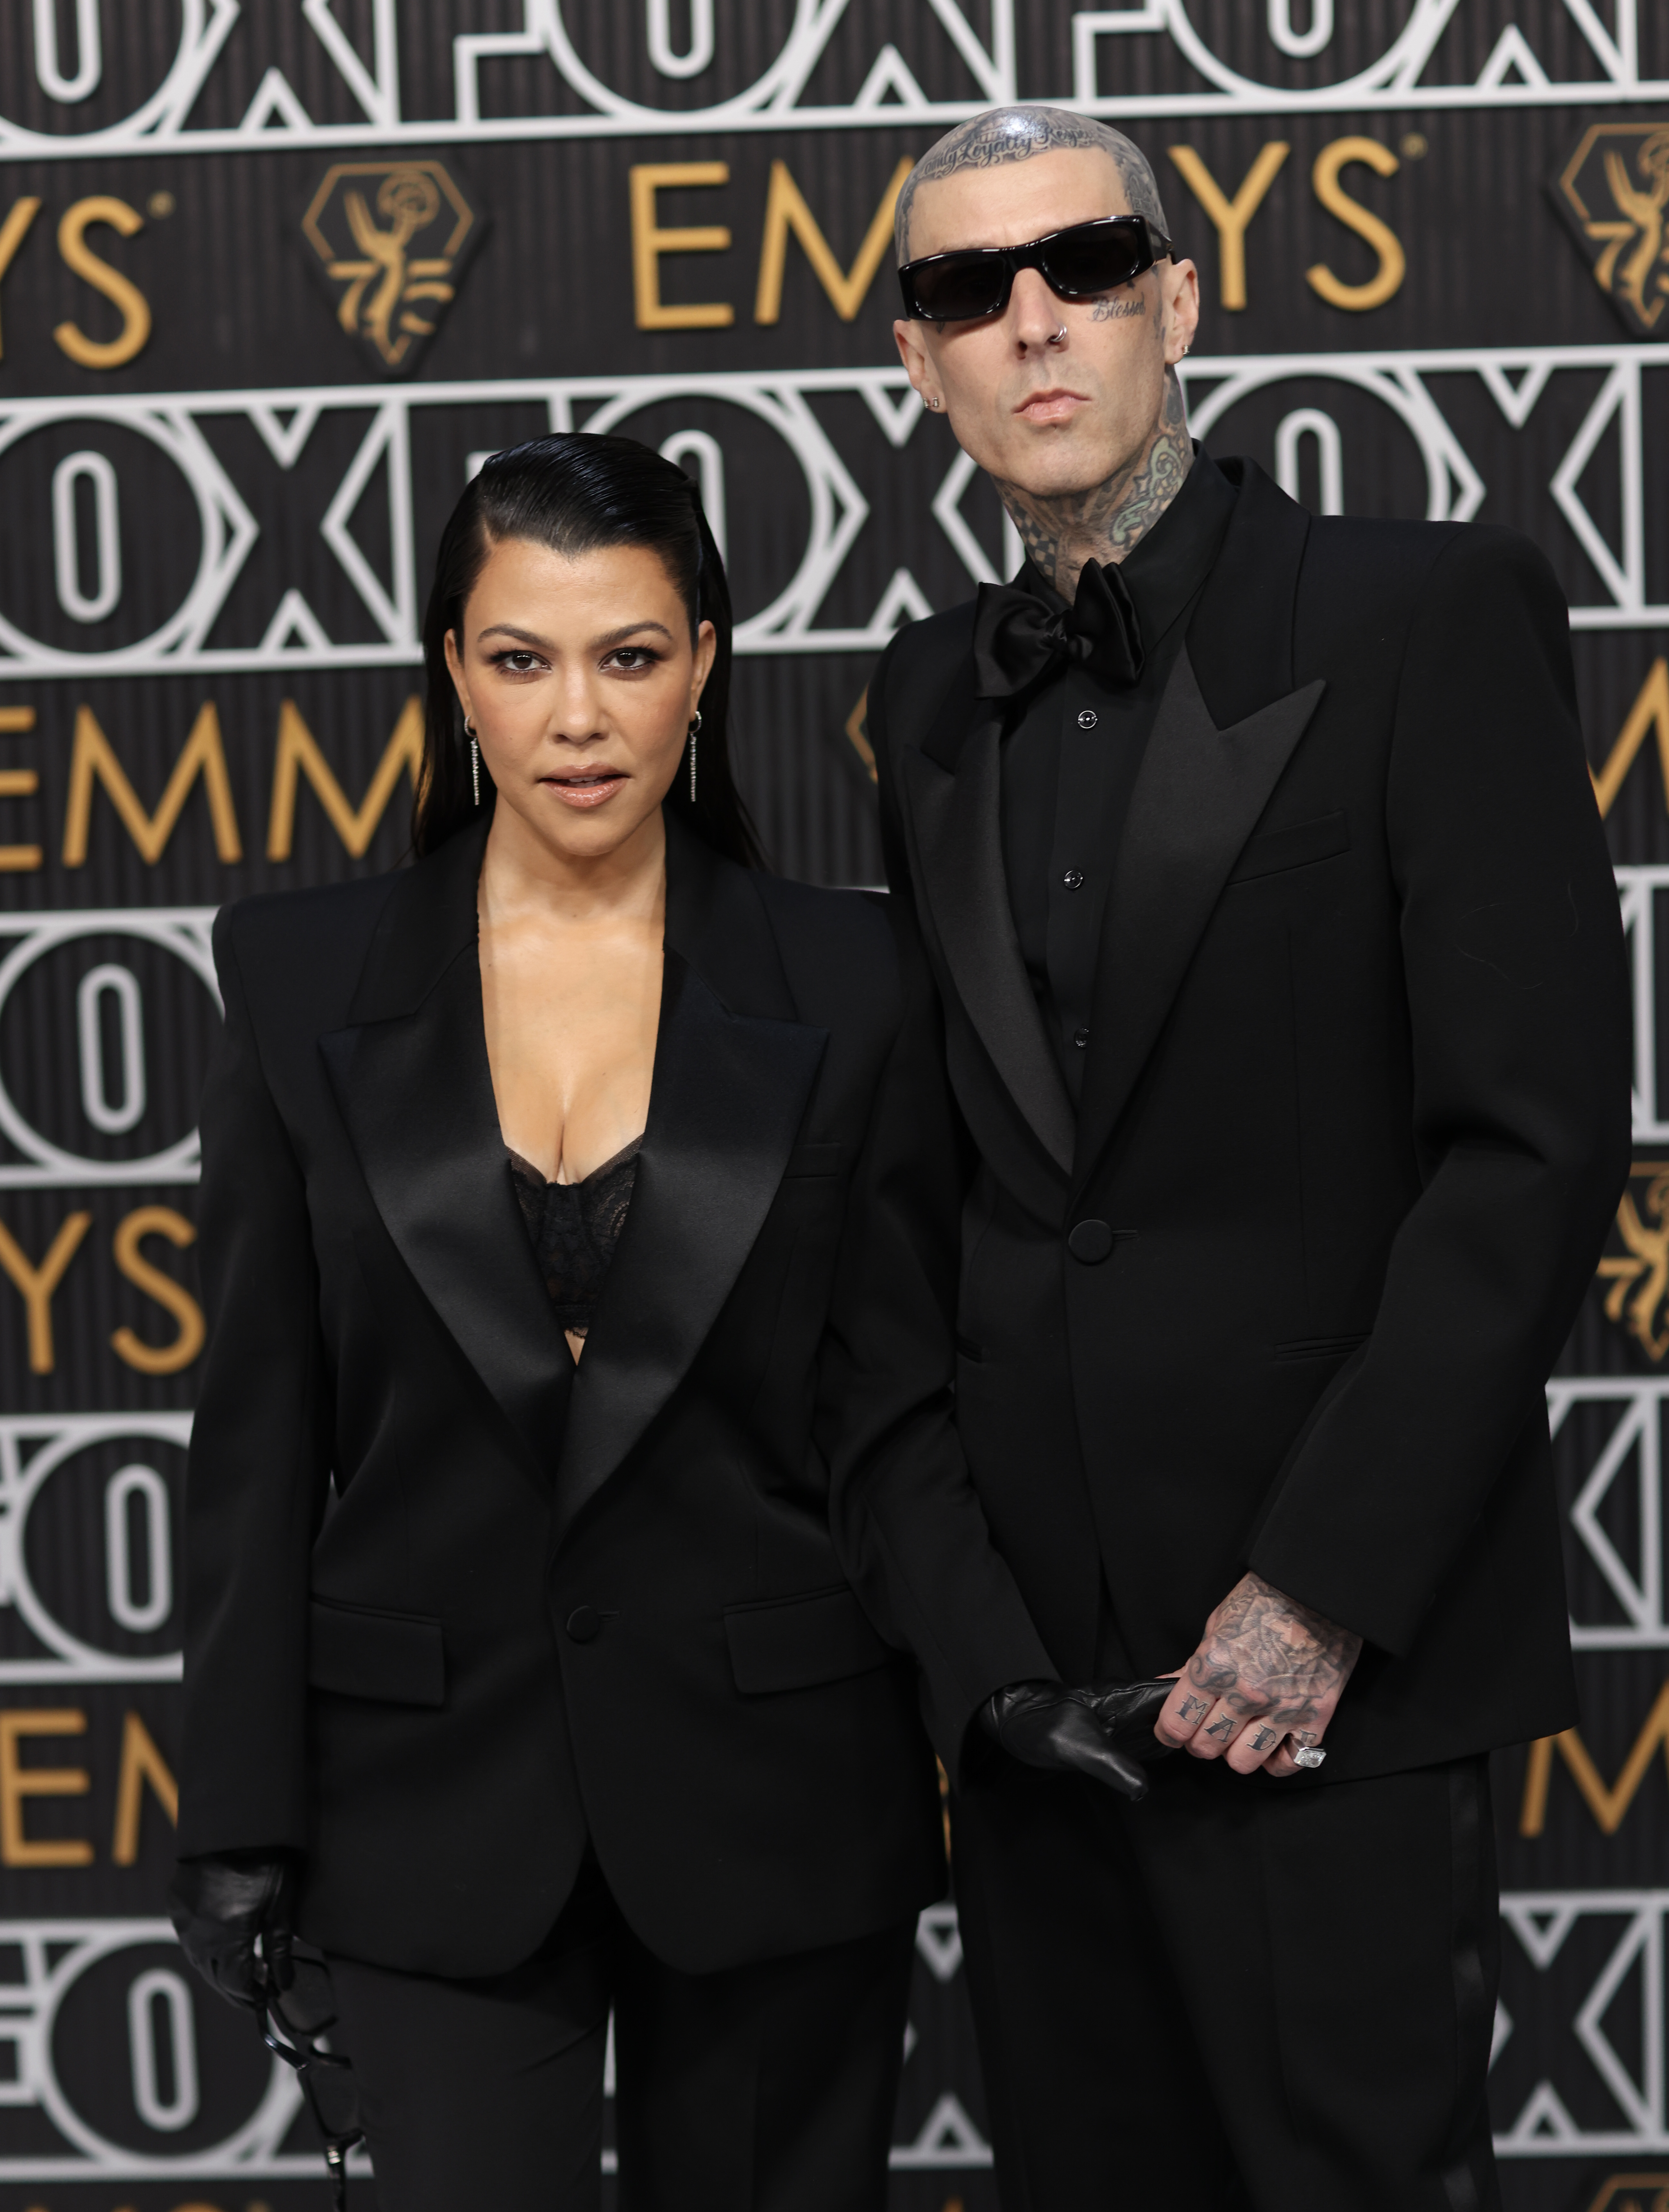 The pair received backlash for supposedly neglecting their older children in a post Kourtney shared on social media from the event